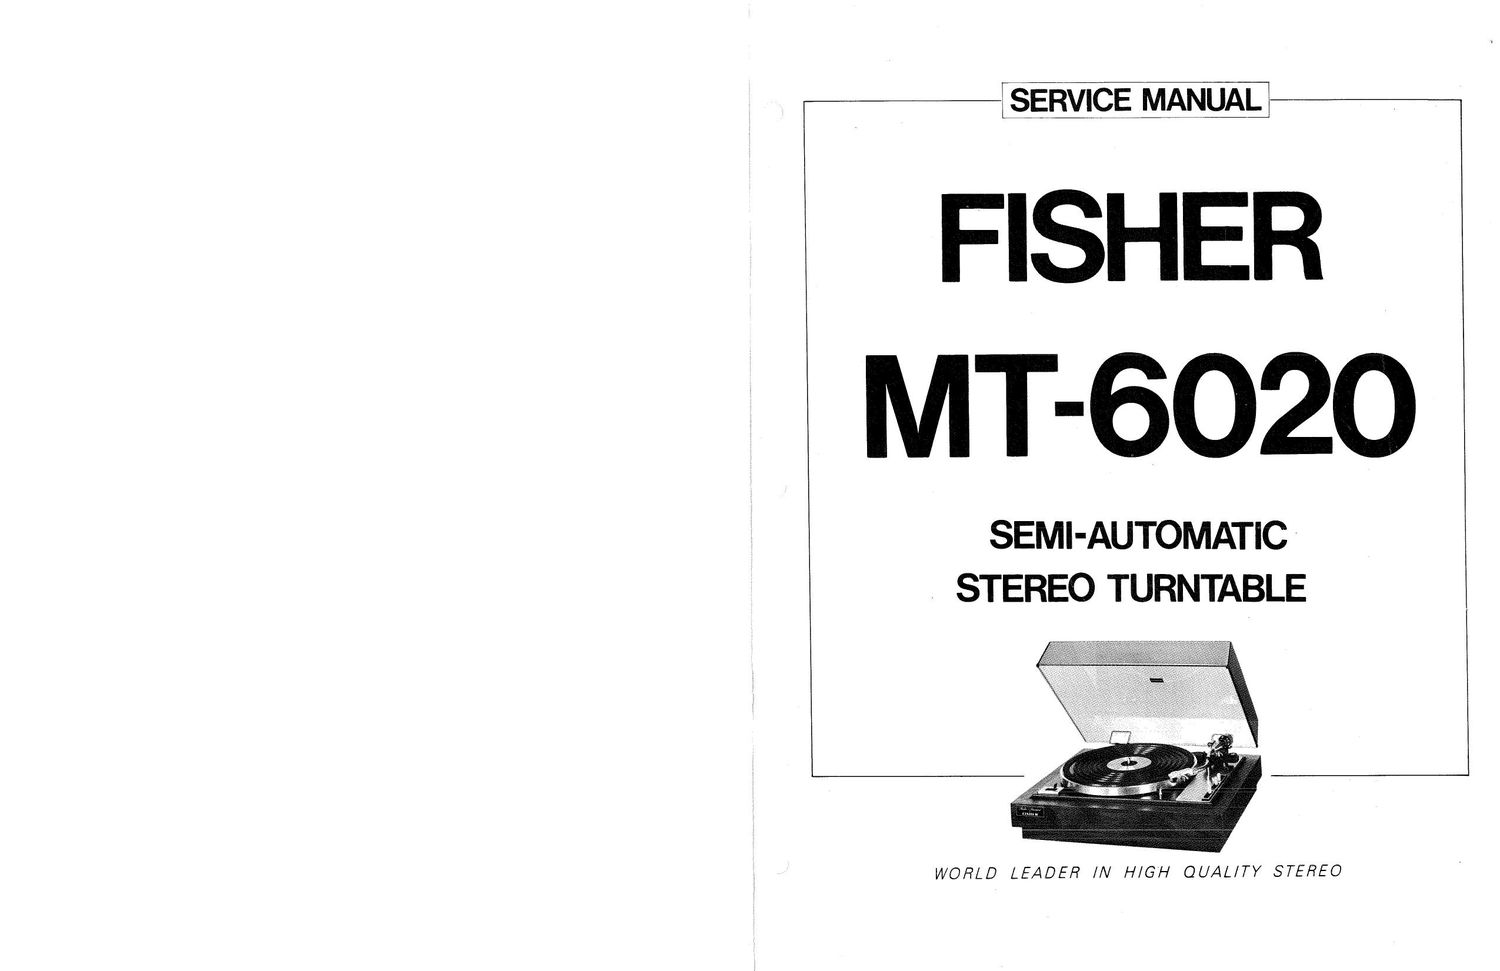 Fisher MT 6020 Service Manual